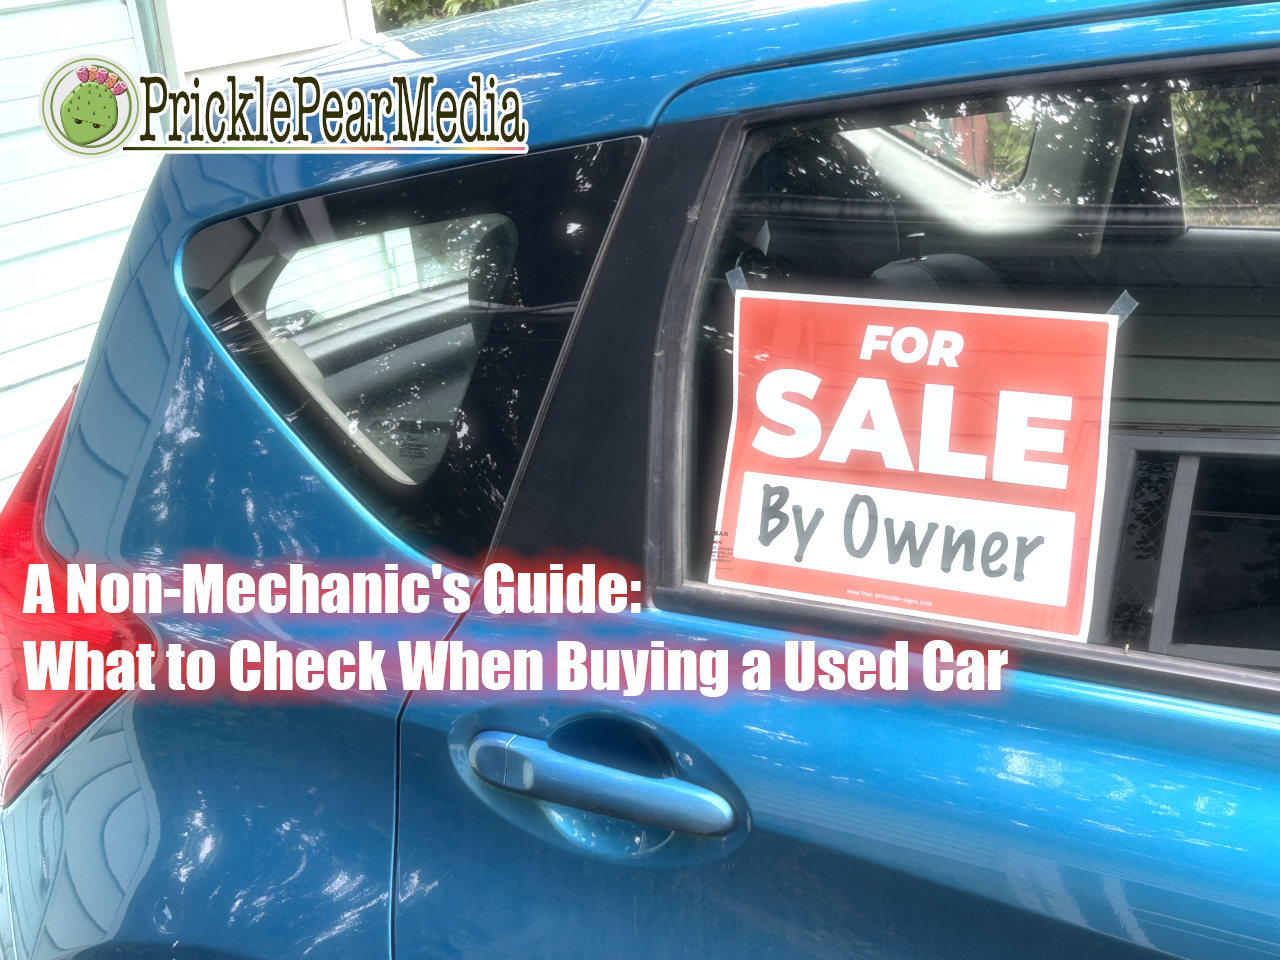 A teel used car with a red for sale sign in the back window. Captioned with A Non-Mechanic’s Guide: What to Check When Buying a Used Car.